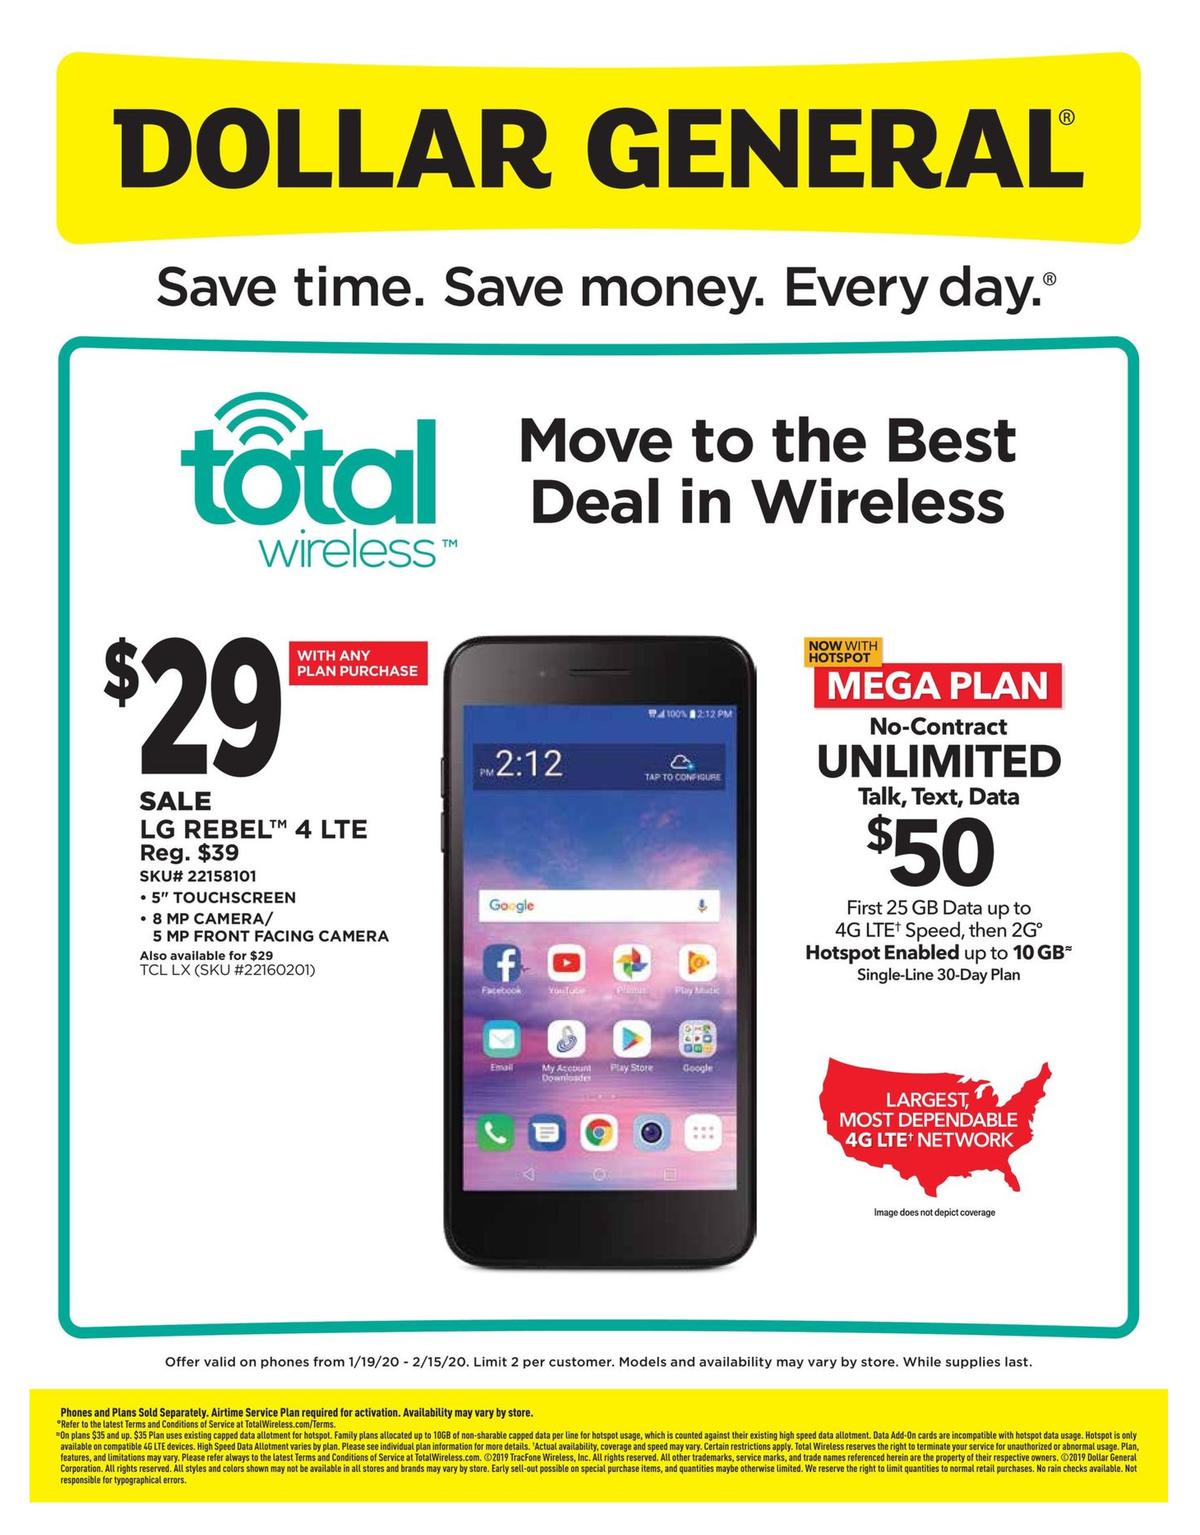 Dollar General Weekly Wireless Specials Weekly Ad from January 19